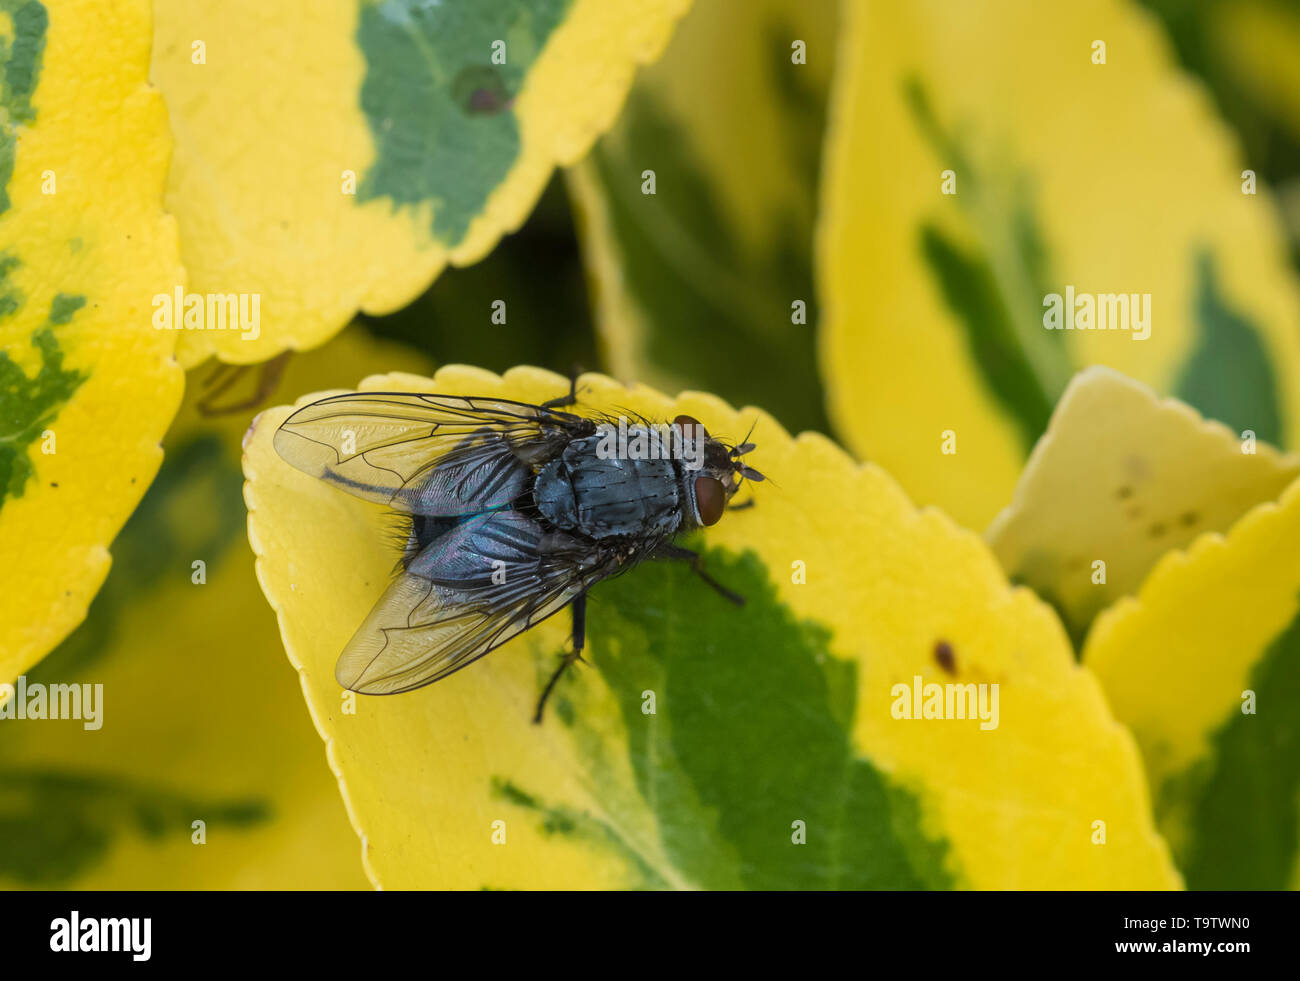 Top down view of a Calliphora vomitoria (Blue bottle fly or Bottlebee), a common blow fly on a Euonymus leaf in Spring in West Sussex, UK. Stock Photo